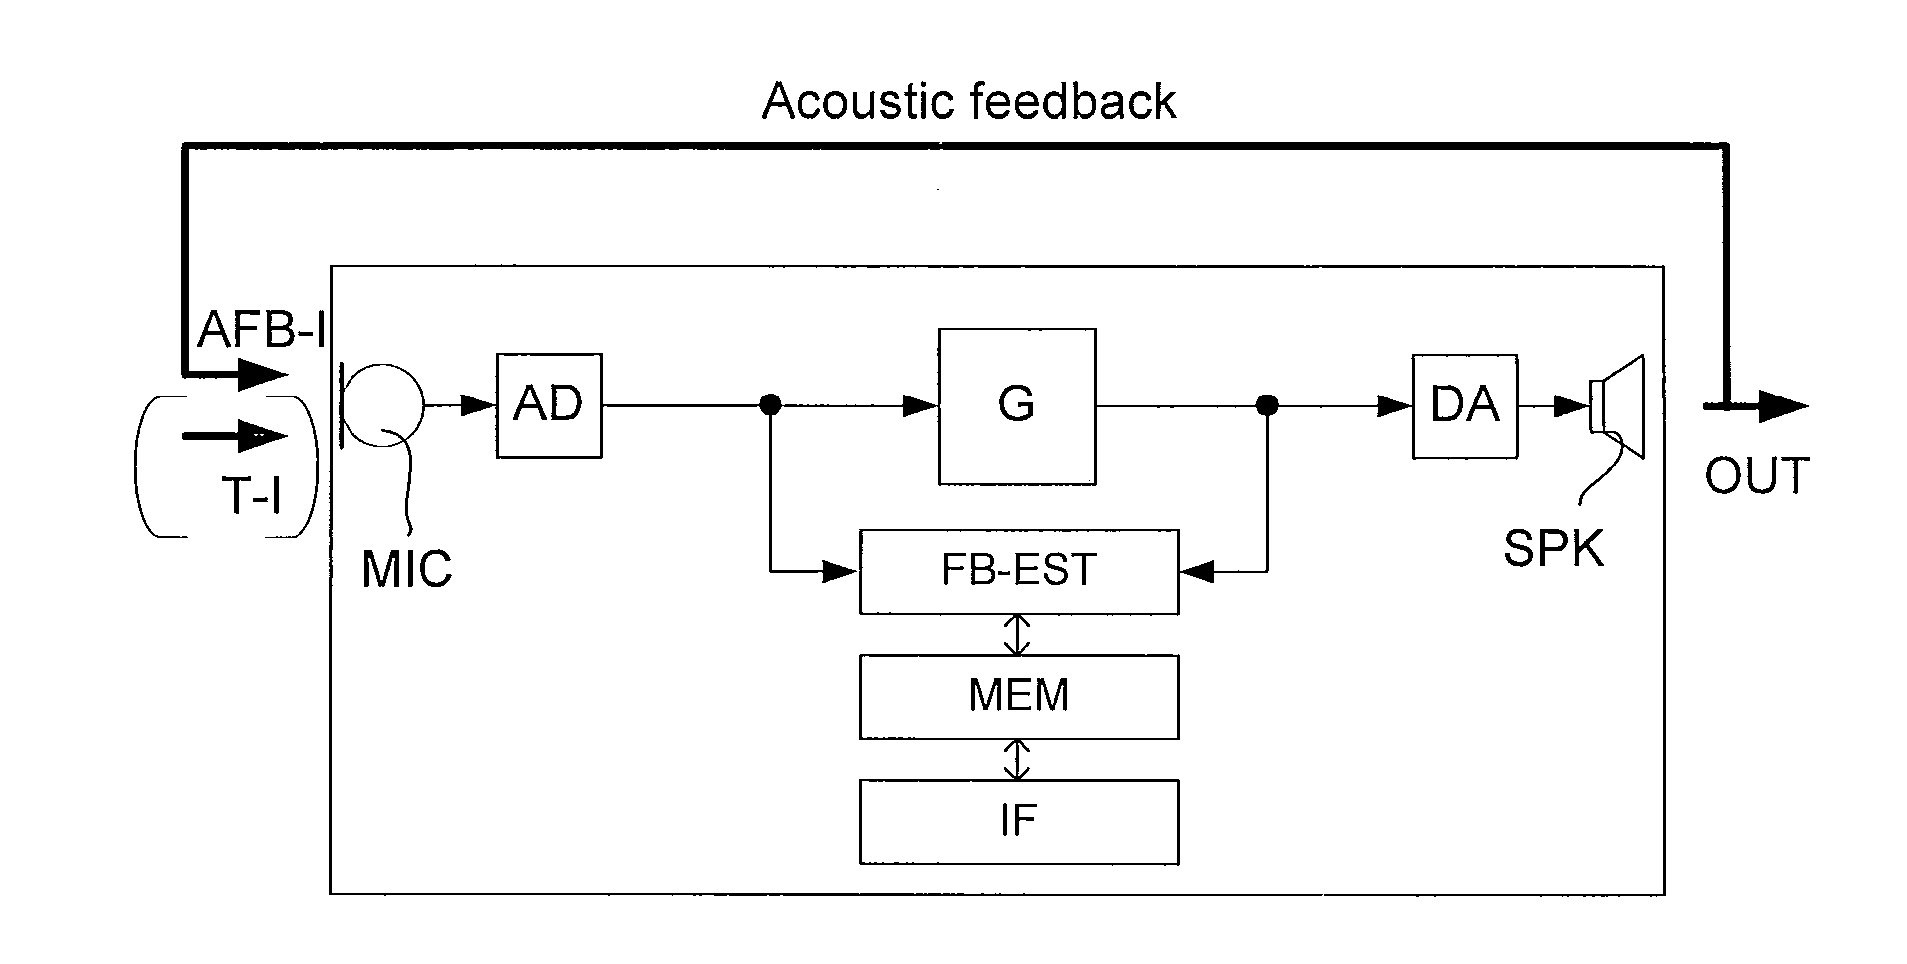 Test system for evaluating feedback performance of a listening device